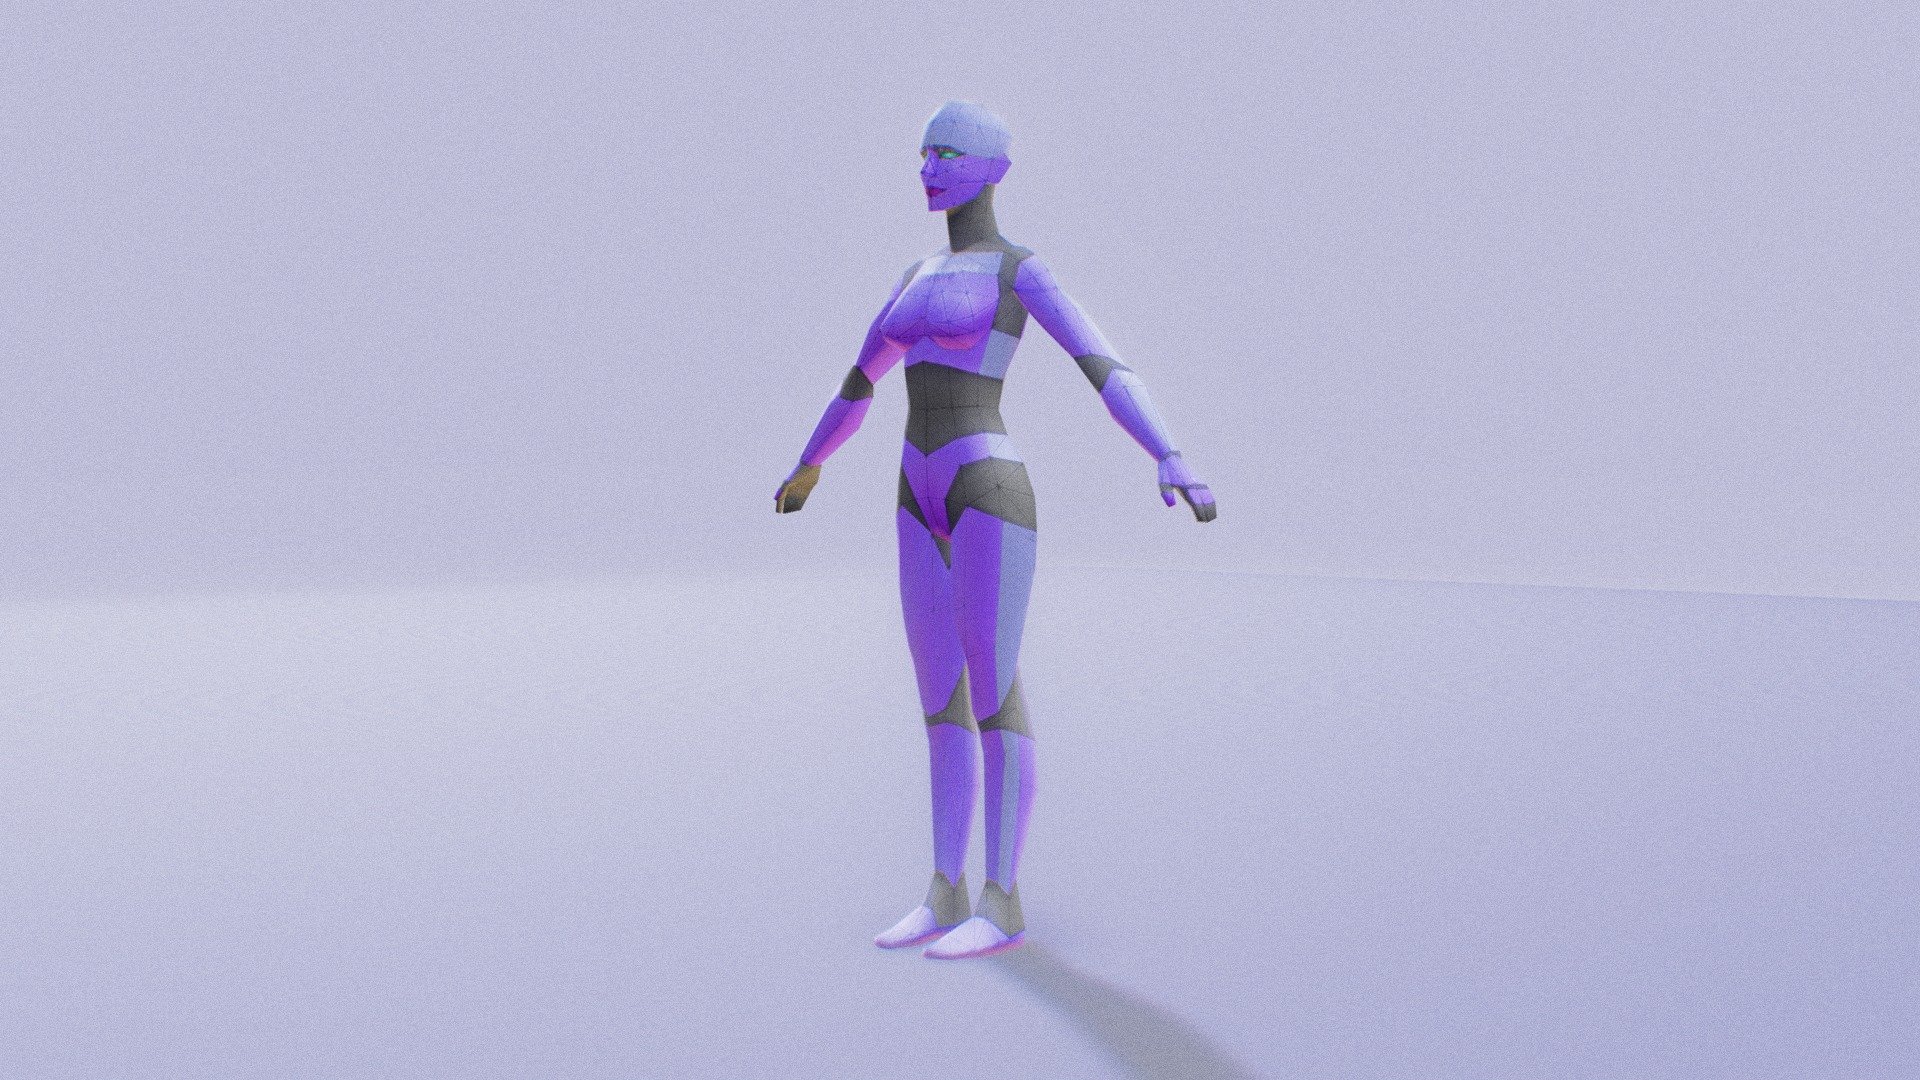 This is an animated test female humanoid character made of 1200 polys, showcasing efficient poly distribution and deformation. Hopefully this model can serve as decent reference for other 3D artists, on how to place polygons for animated characters.
I was a game production artist from Playstation 2 era, where a 1000 polygons back then were a bargain, so I still pride myself for being capable to craft under strict limitations.
I feel like a dinosaur from an bygone era 3d model